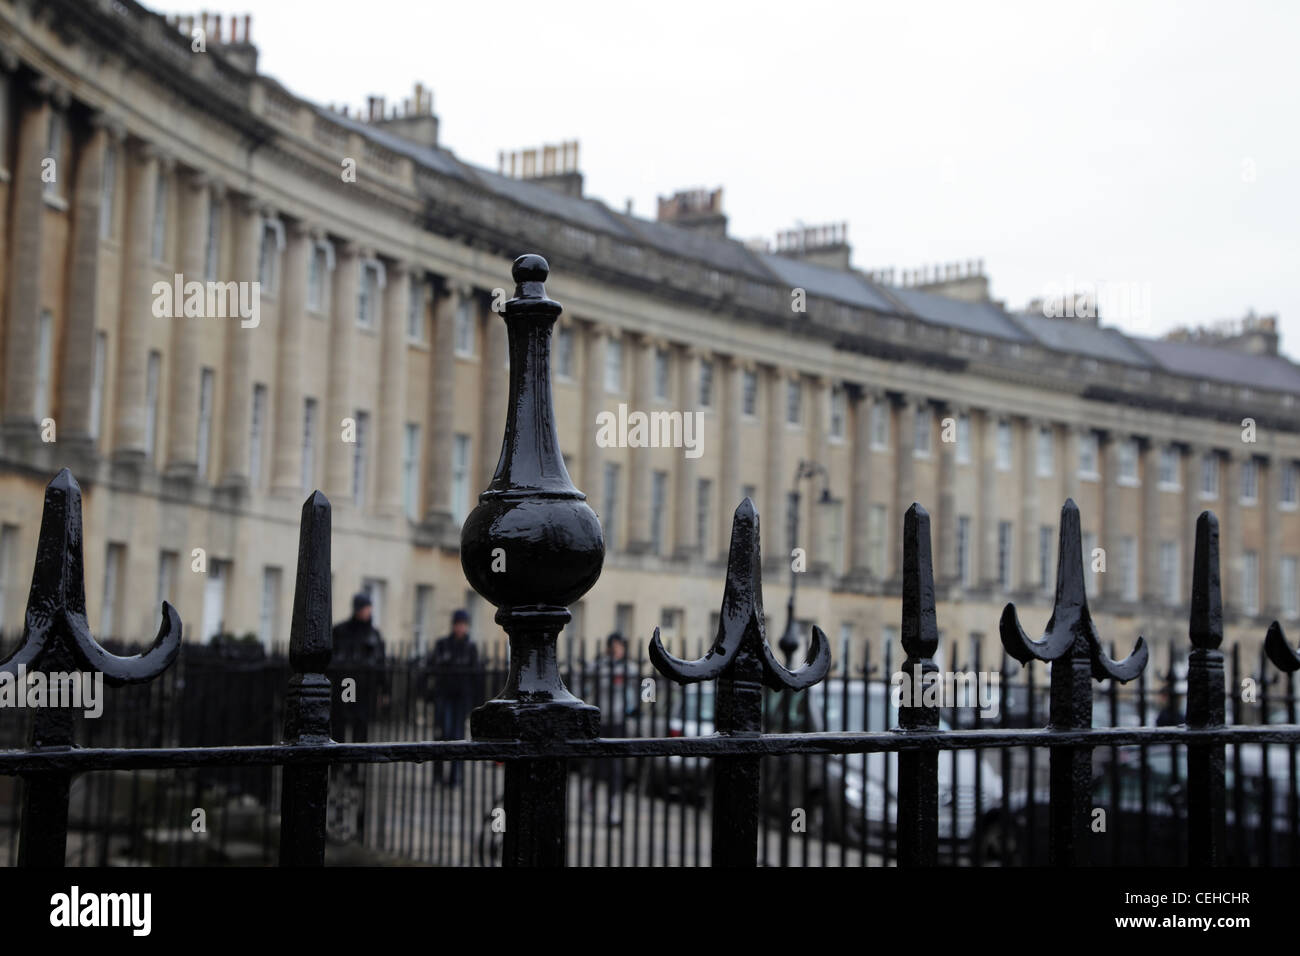 Railings in the Royal Crescent in bath Stock Photo